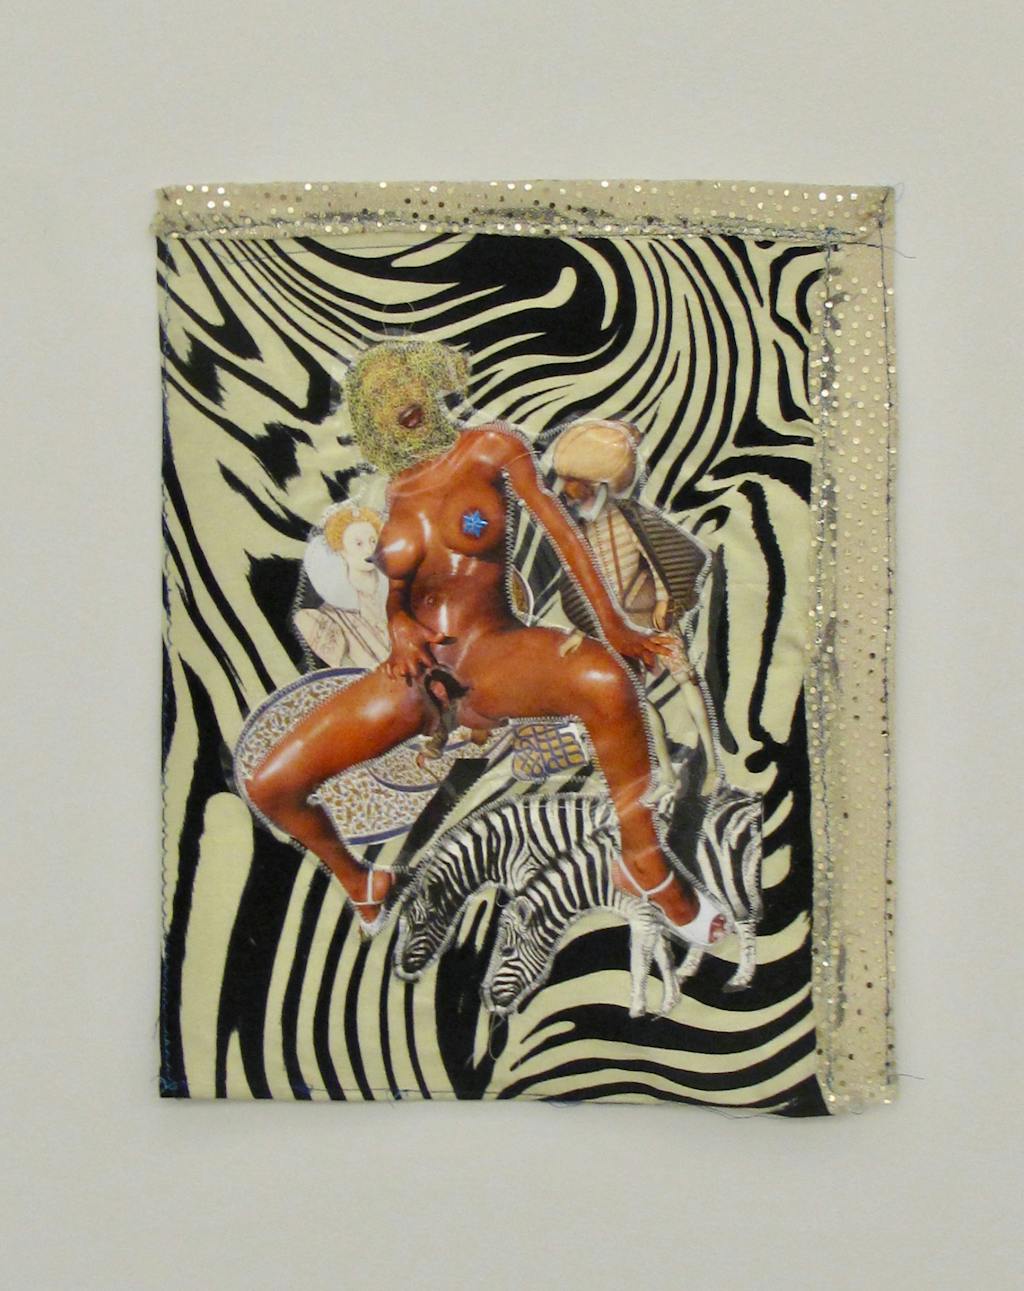 Patricia Kaersenhout
Your History Makes Me So Horny, 2011
mixed media on textile, 50 cm x 40 cm, framed in perspex box (5) - © Paris Internationale